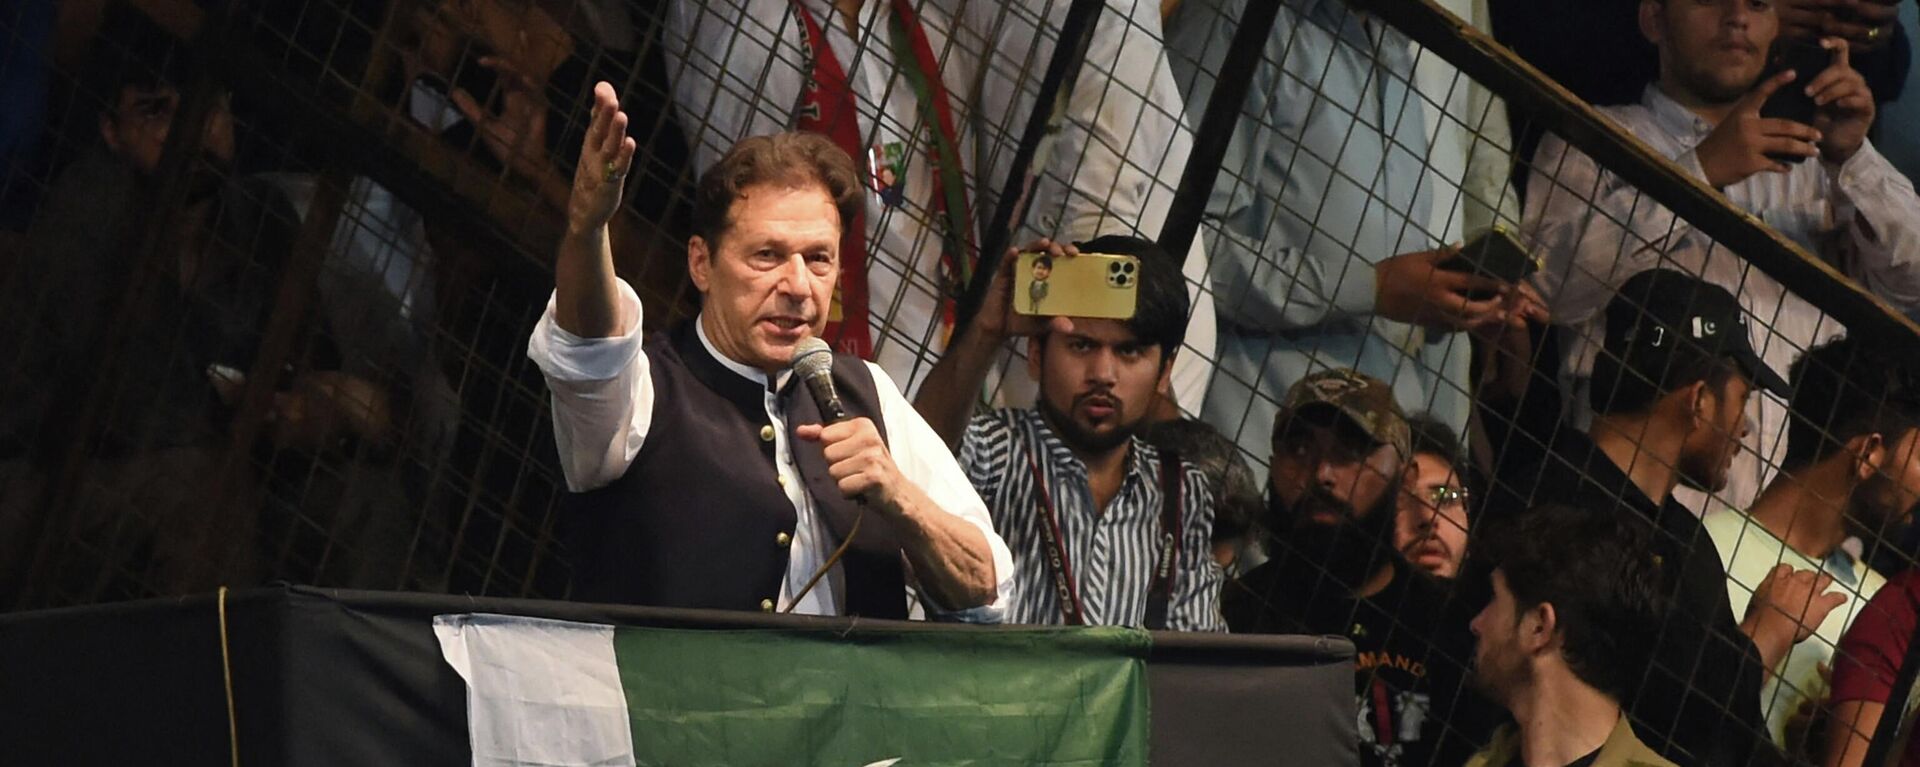 Pakistan's former Prime Minister and Pakistan Tehreek-e-Insaf party (PTI) chief Imran Khan, delivers a speech to his supporters during a rally celebrate the 75th anniversary of Pakistan's independence day in Lahore on August 13, 2022. - Sputnik International, 1920, 25.08.2022